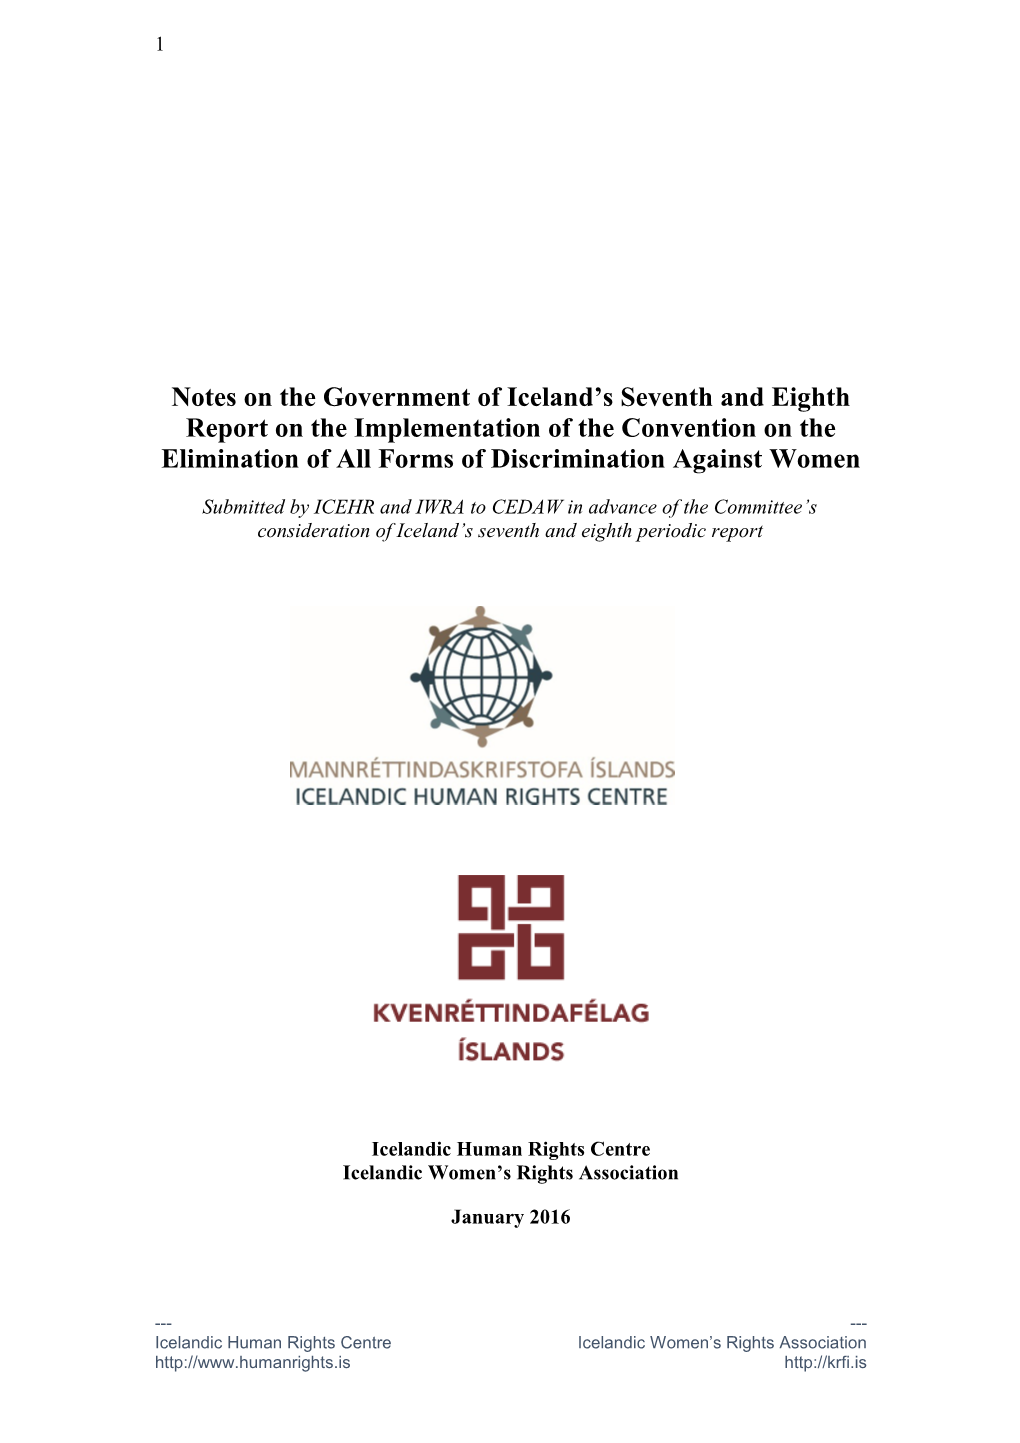 Notes on the Government of Iceland S Seventh and Eighth Report on the Implementation Of